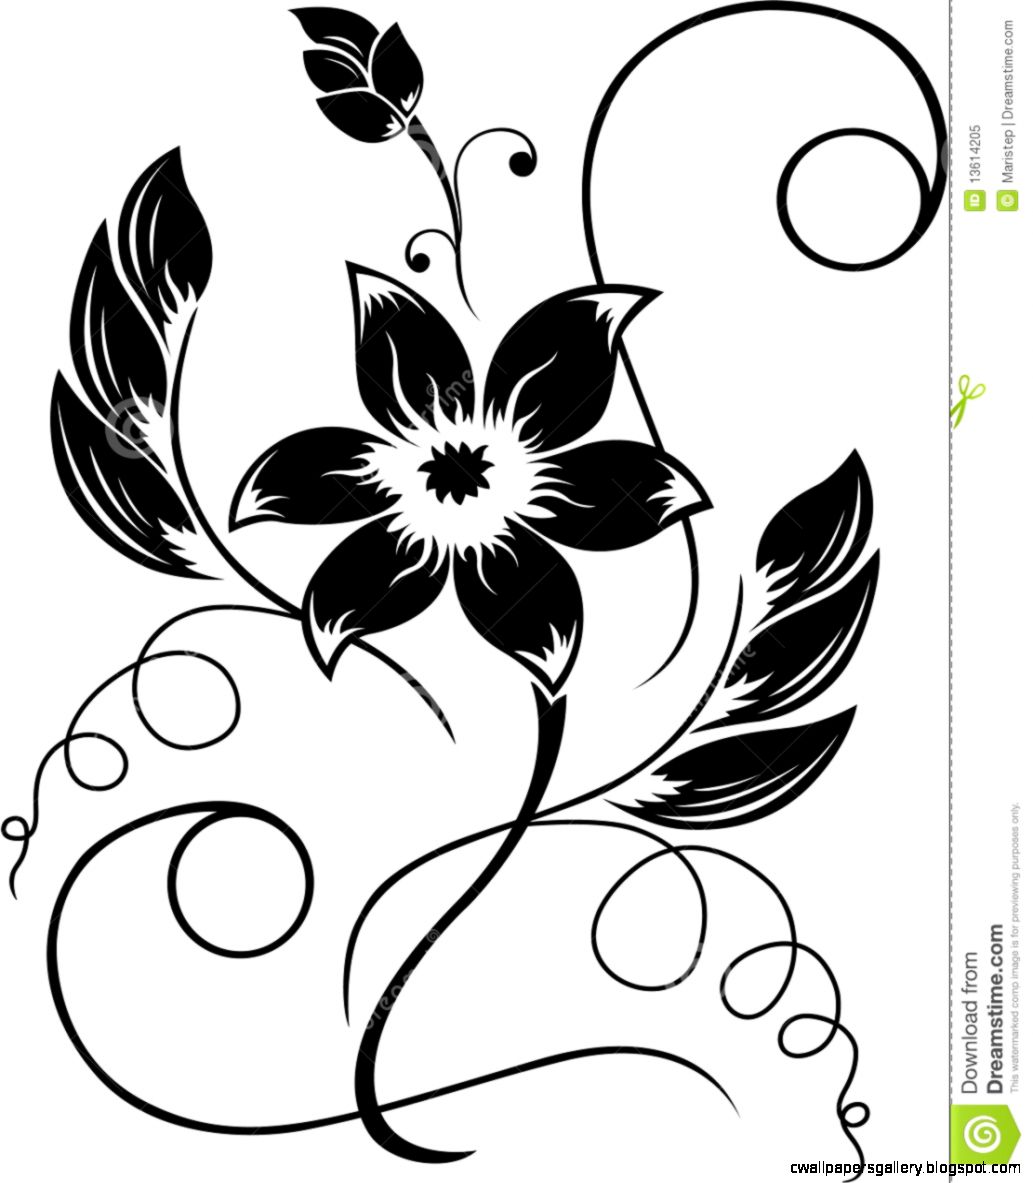 Black And White Flowers Drawing at GetDrawings | Free download